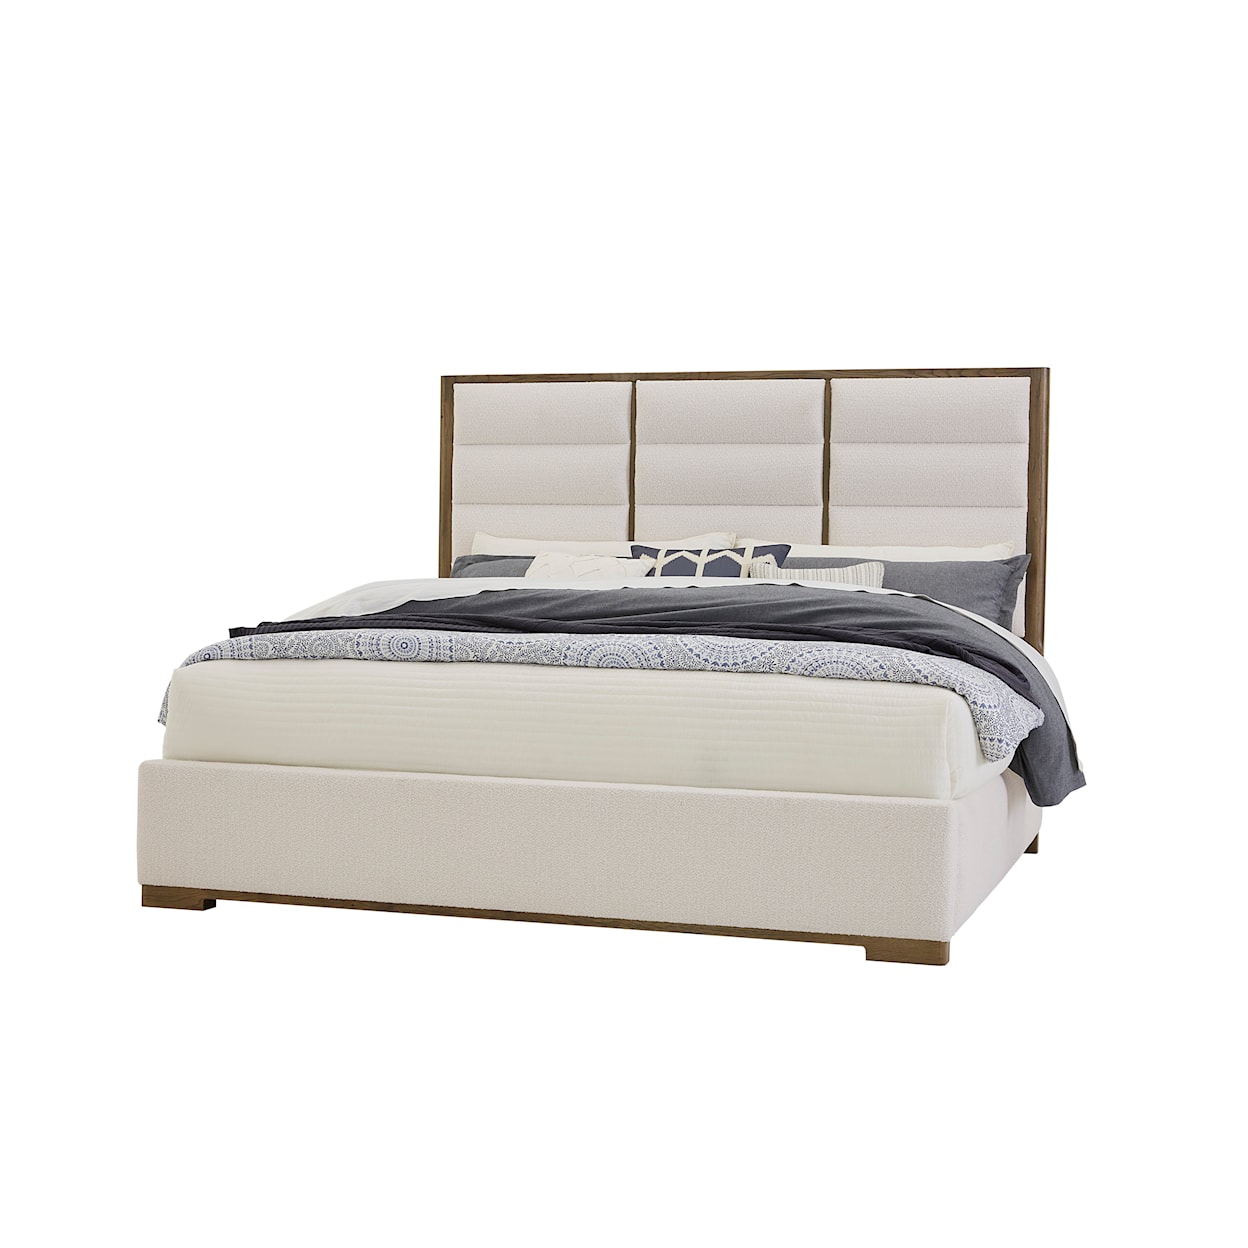 Vaughan Bassett Crafted Oak - Aged Grey Upholstered King Panel Bed